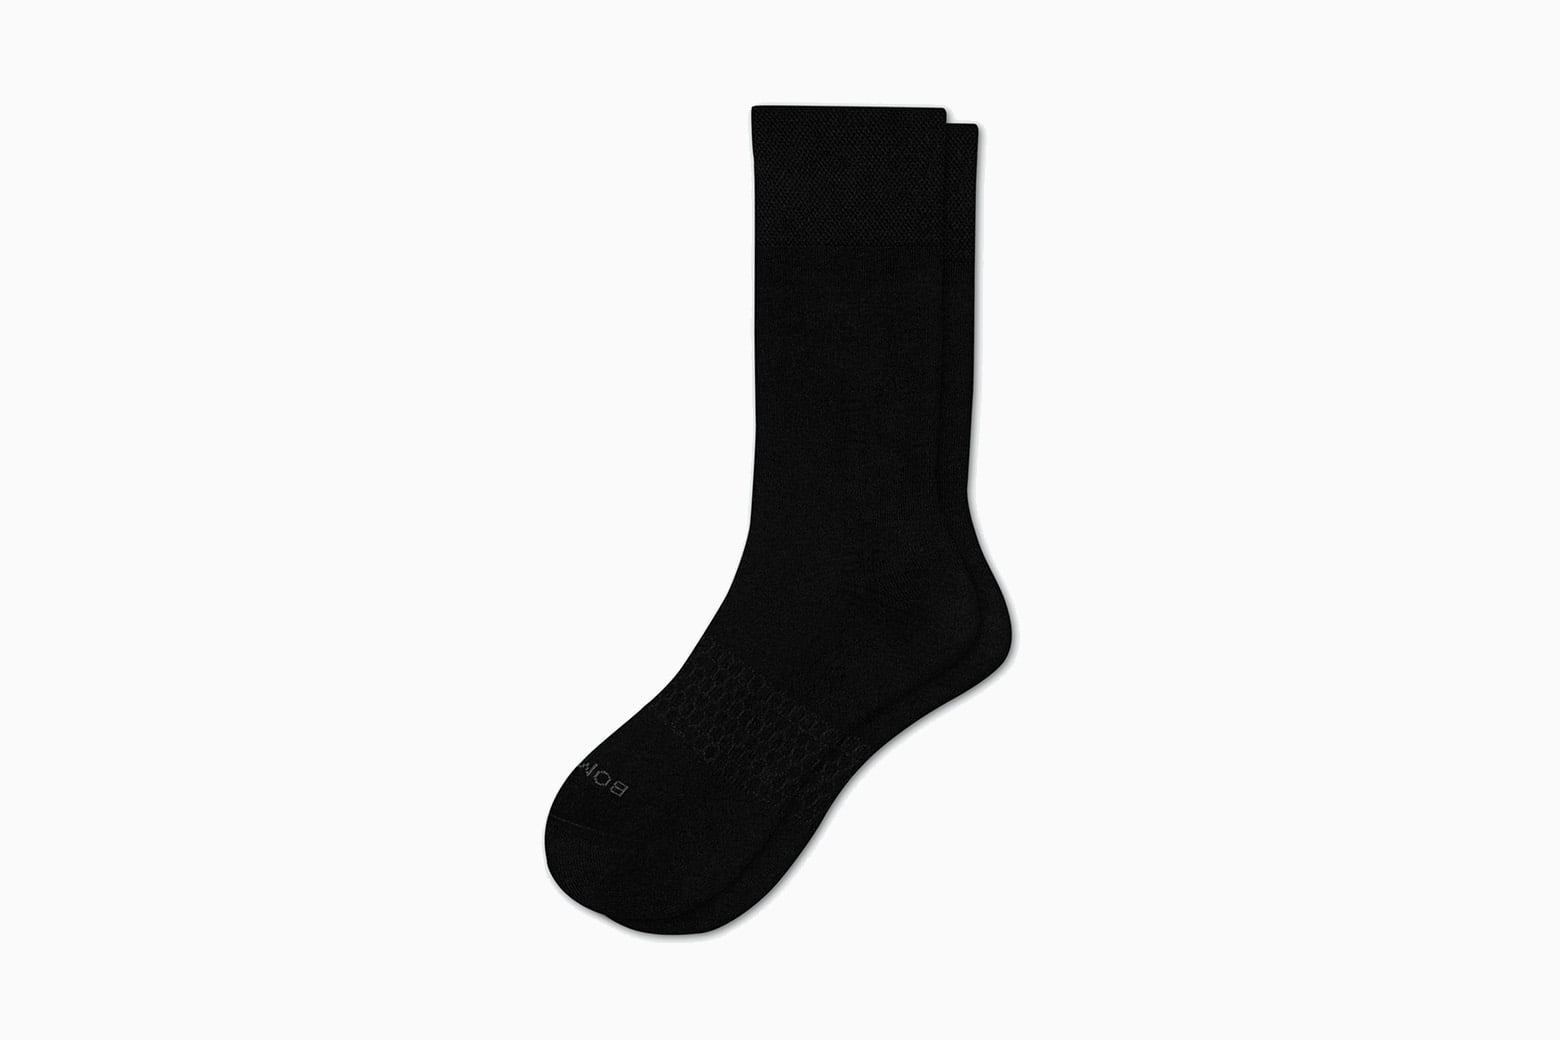 Bombas Socks: Made For People Who Strive To Bee Better